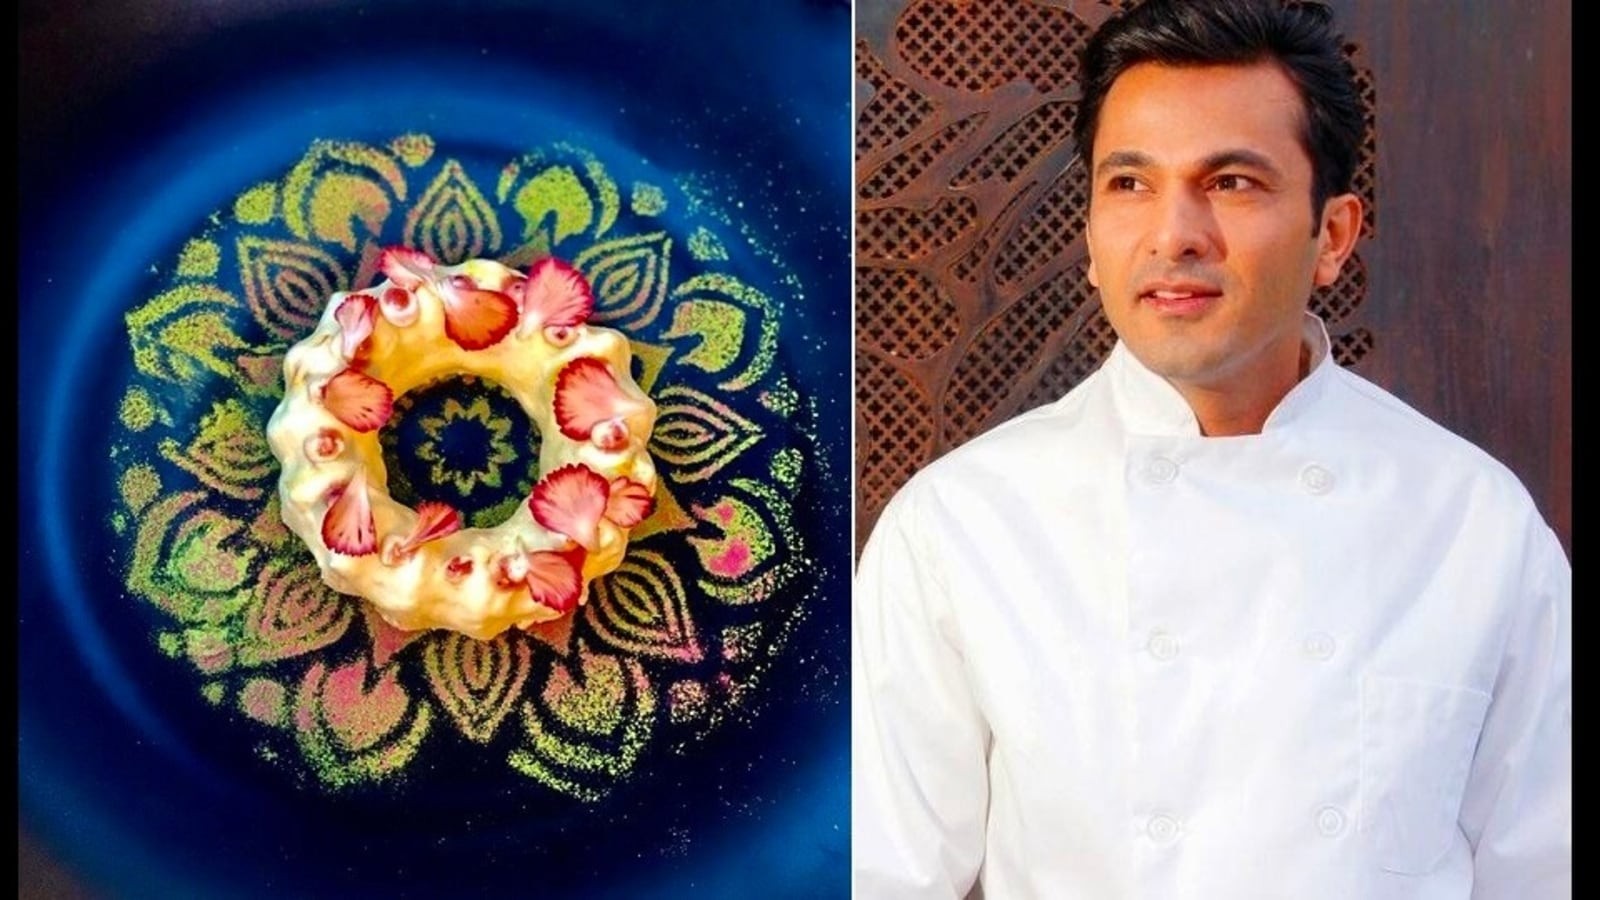 Top 10 Most Famous and Talented Chefs in the World